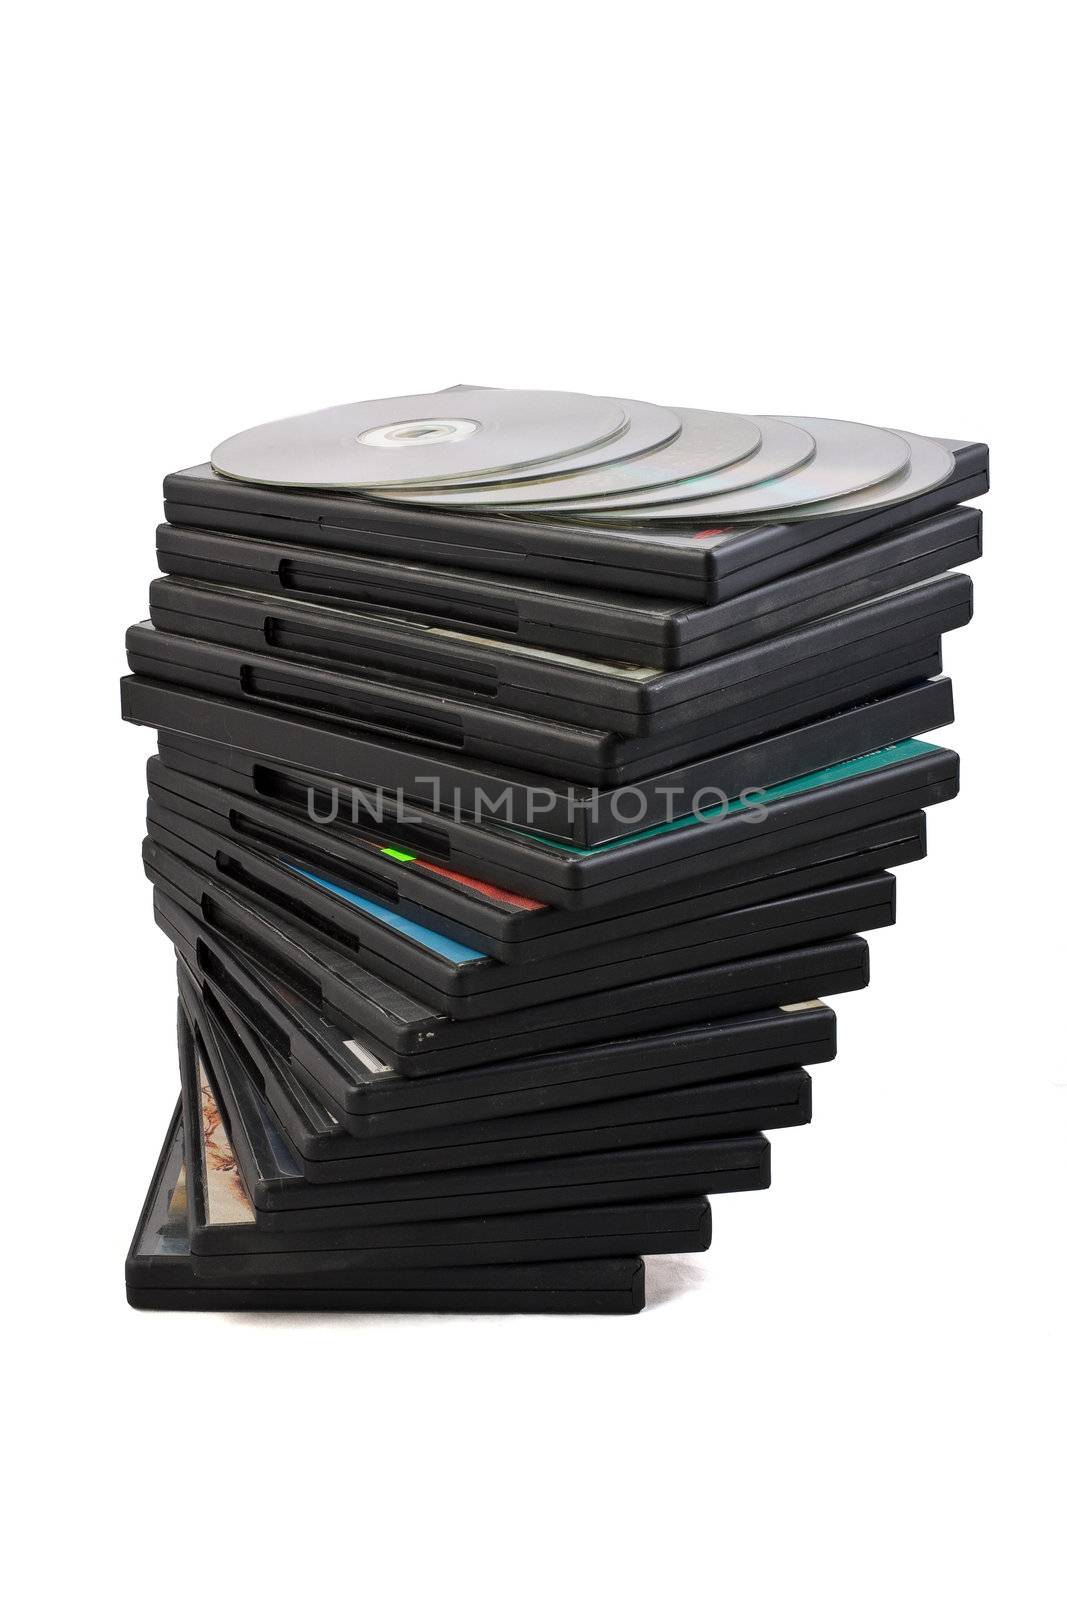 pack of DVD discs on a white background